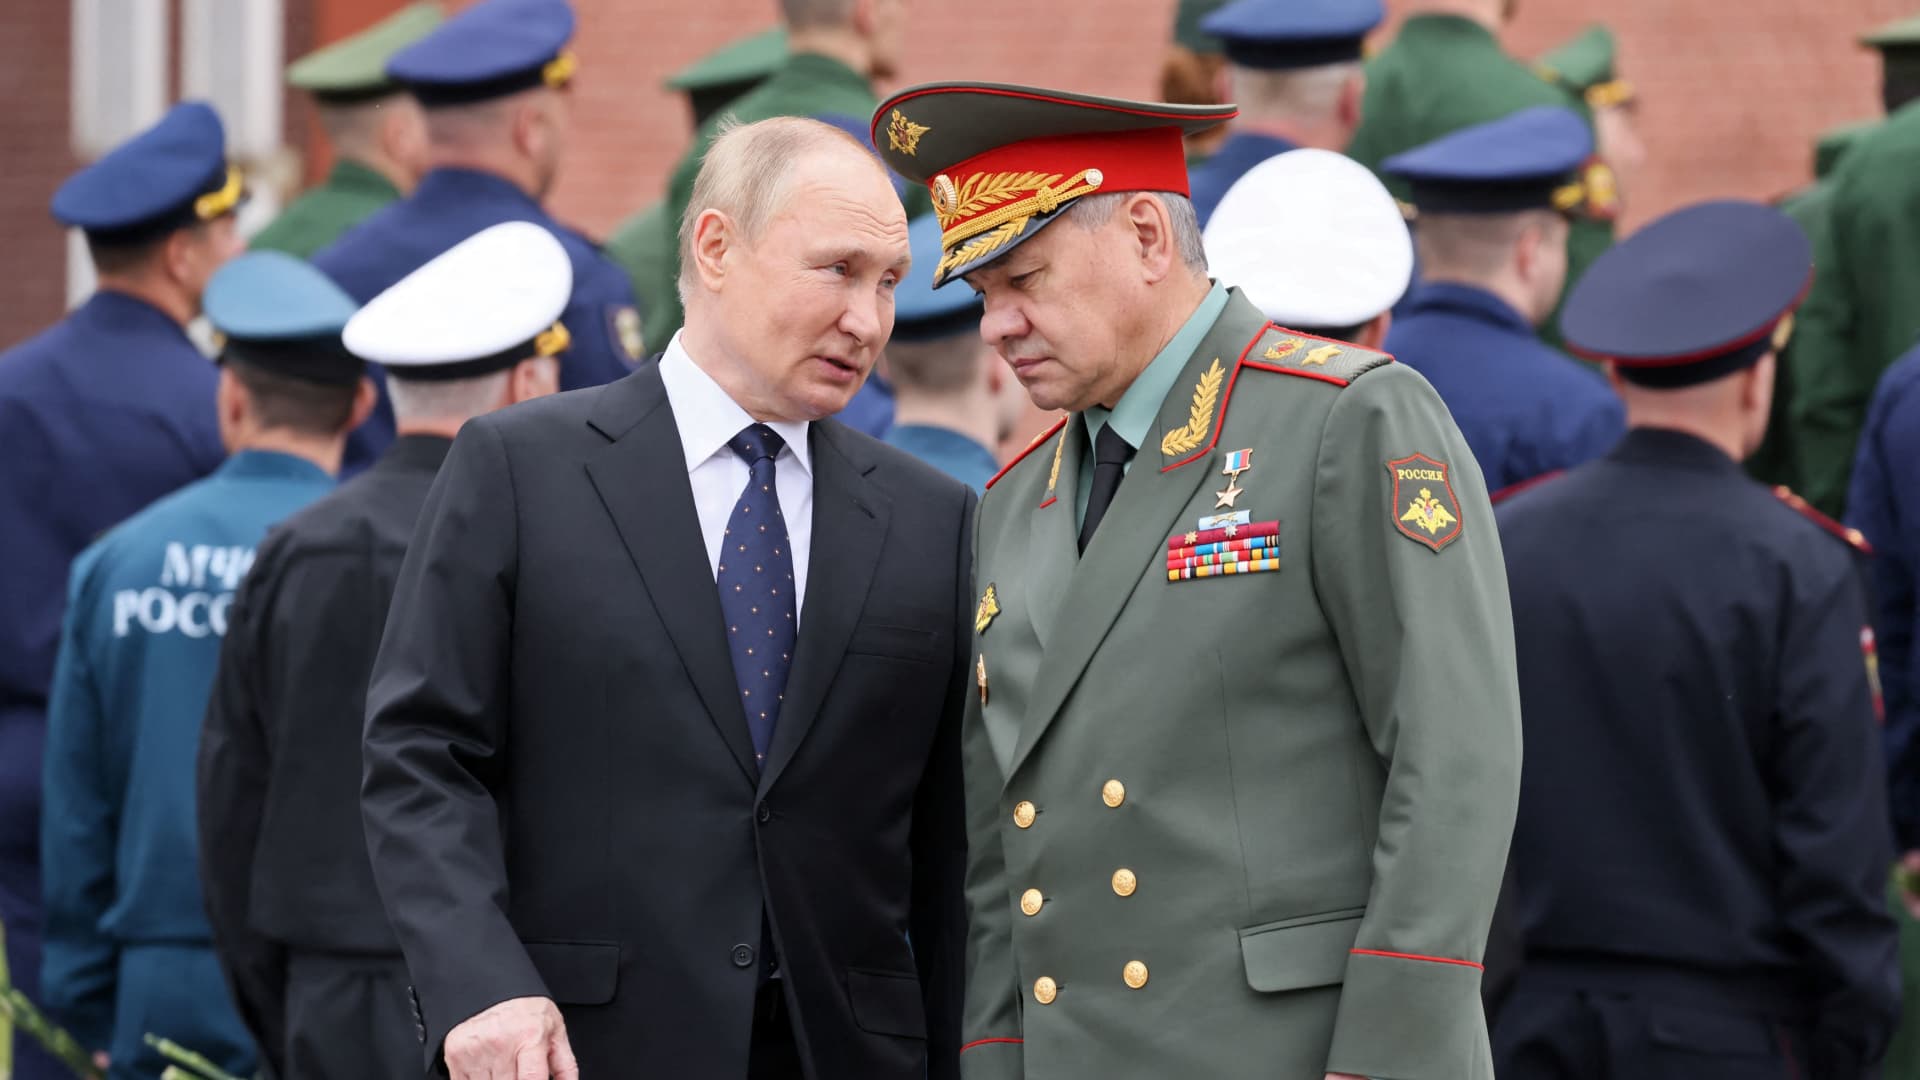 Russian President Vladimir Putin and Defence Minister Sergei Shoigu attend a wreath-laying ceremony, which marks the anniversary of the beginning of the Great Patriotic War against Nazi Germany in 1941, at the Tomb of the Unknown Soldier by the Kremlin wall in Moscow, Russia June 22, 2022. 